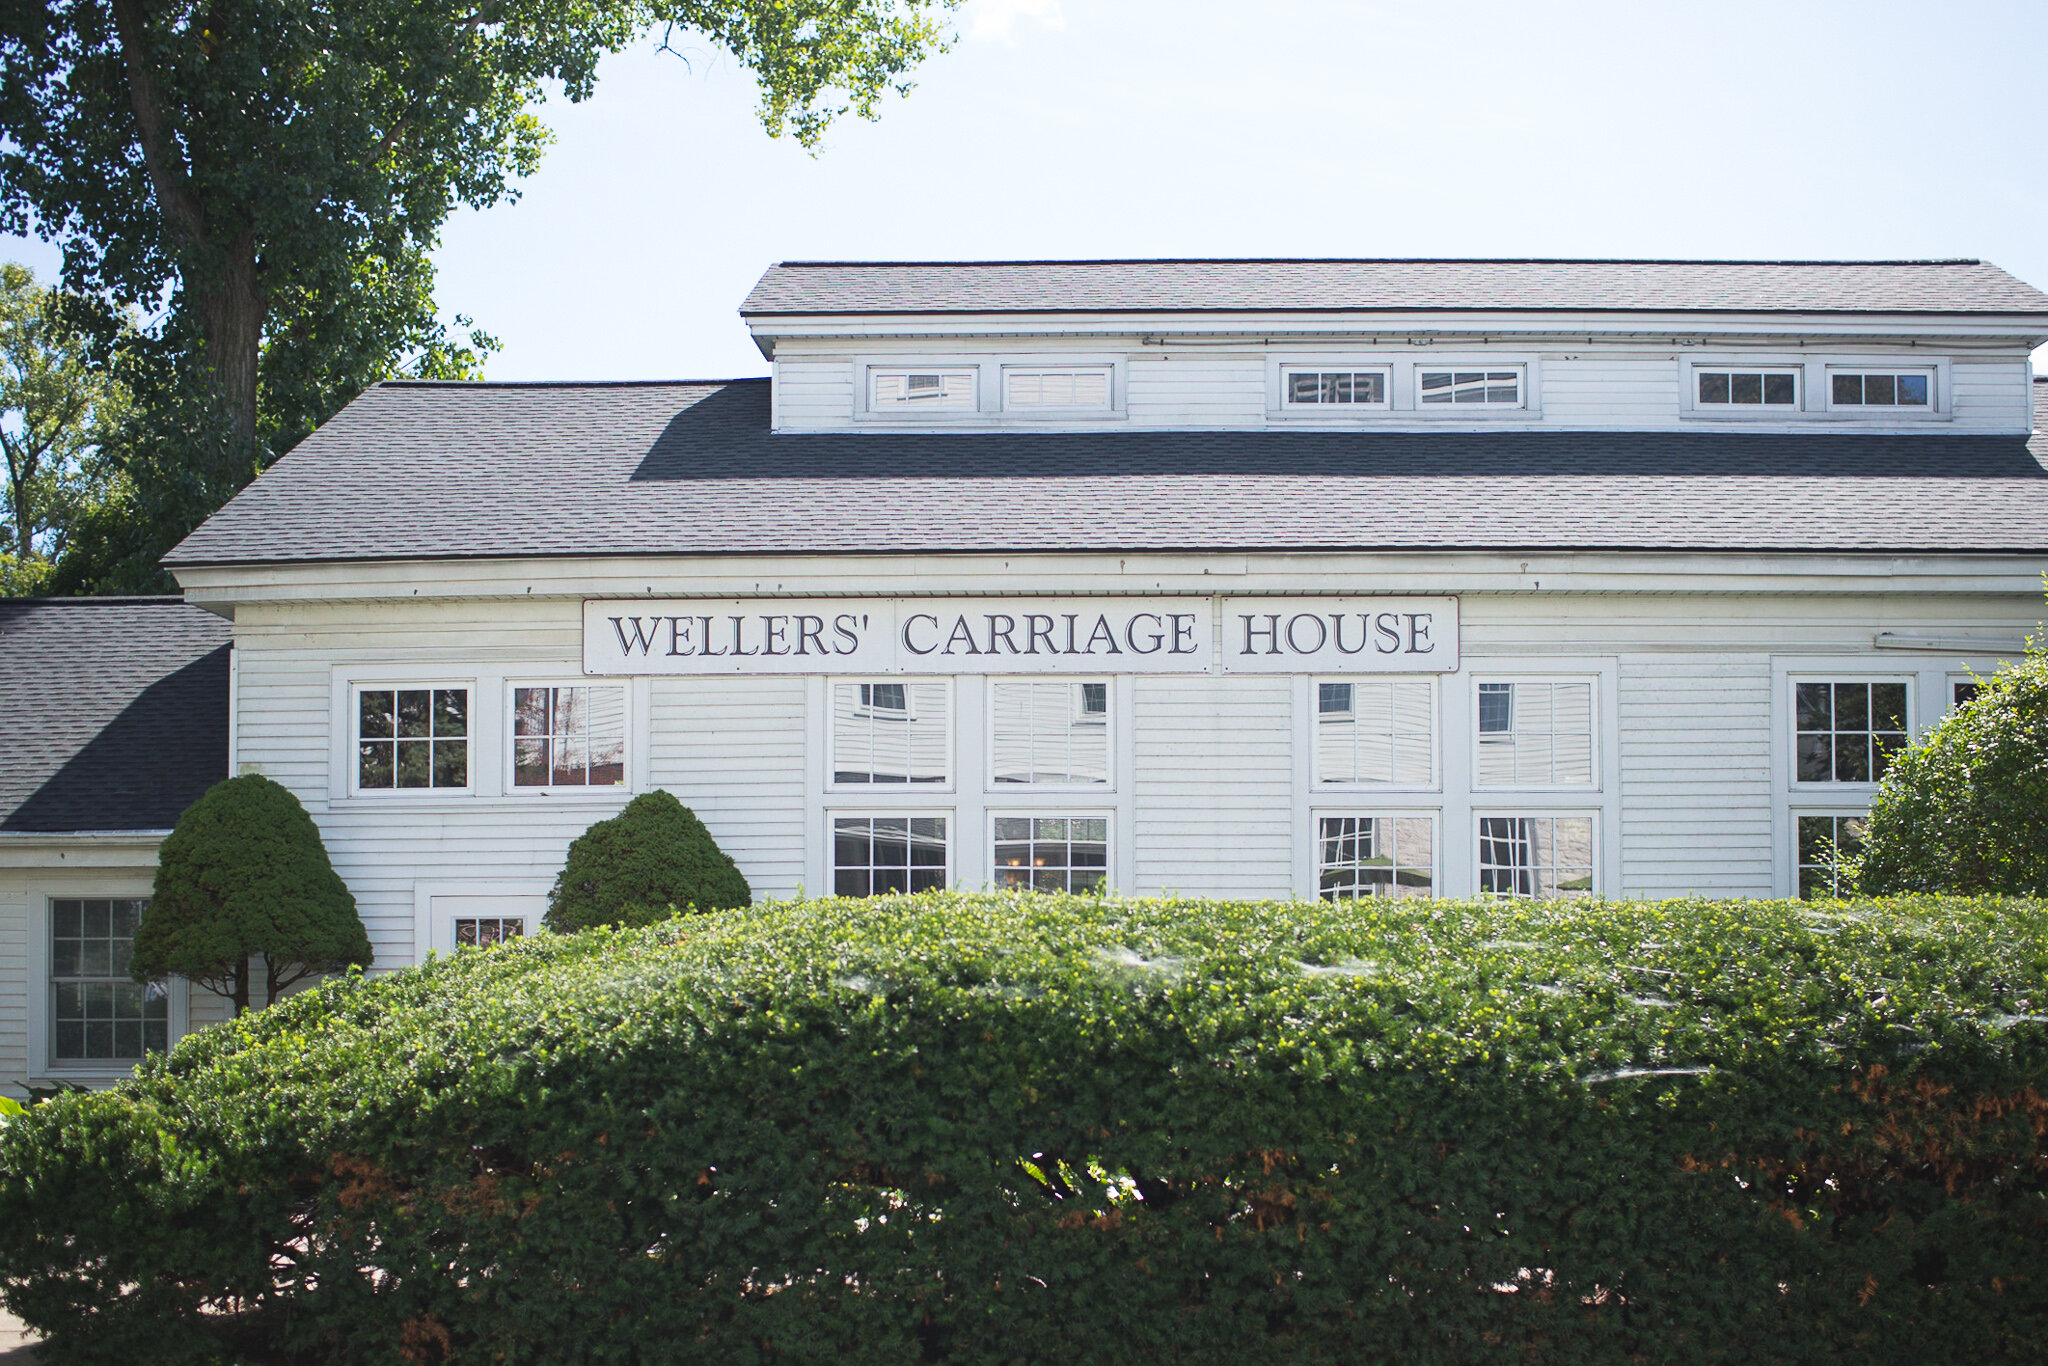 Wellers Carriage House History